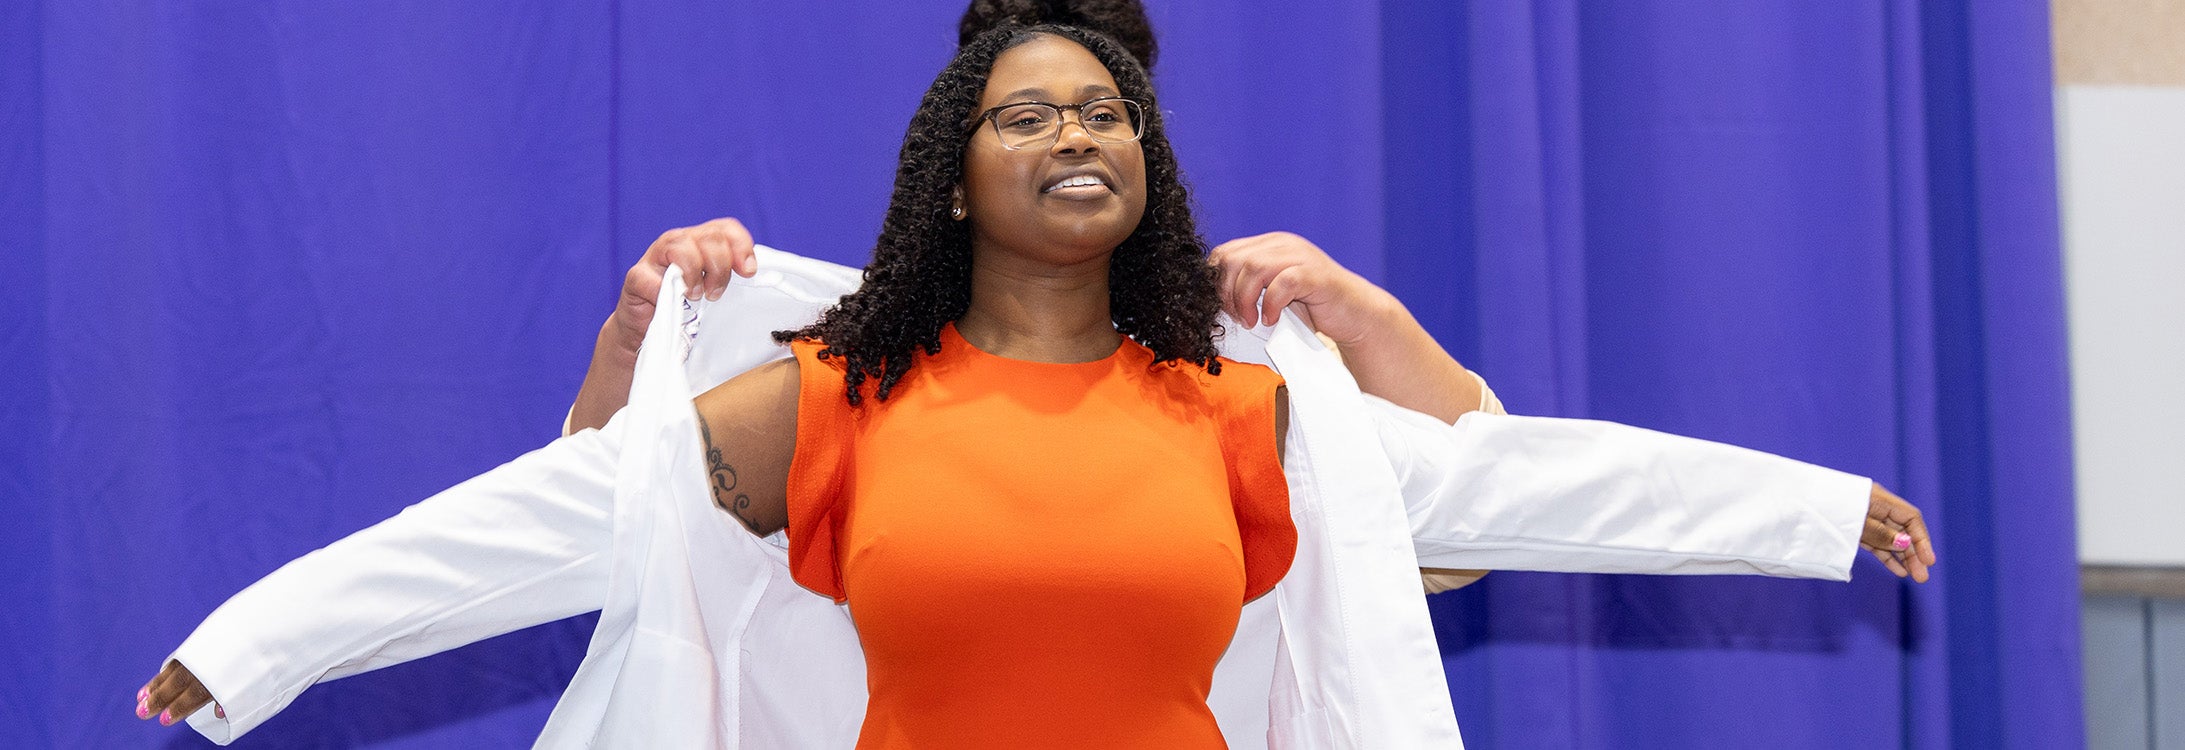 Monique Howell, a first year medical student in East Carolina University's Brody School of Medicine, receives her white coat during the university's annual White Coat Ceremony on Friday. (ECU photos by Rhett Butler)